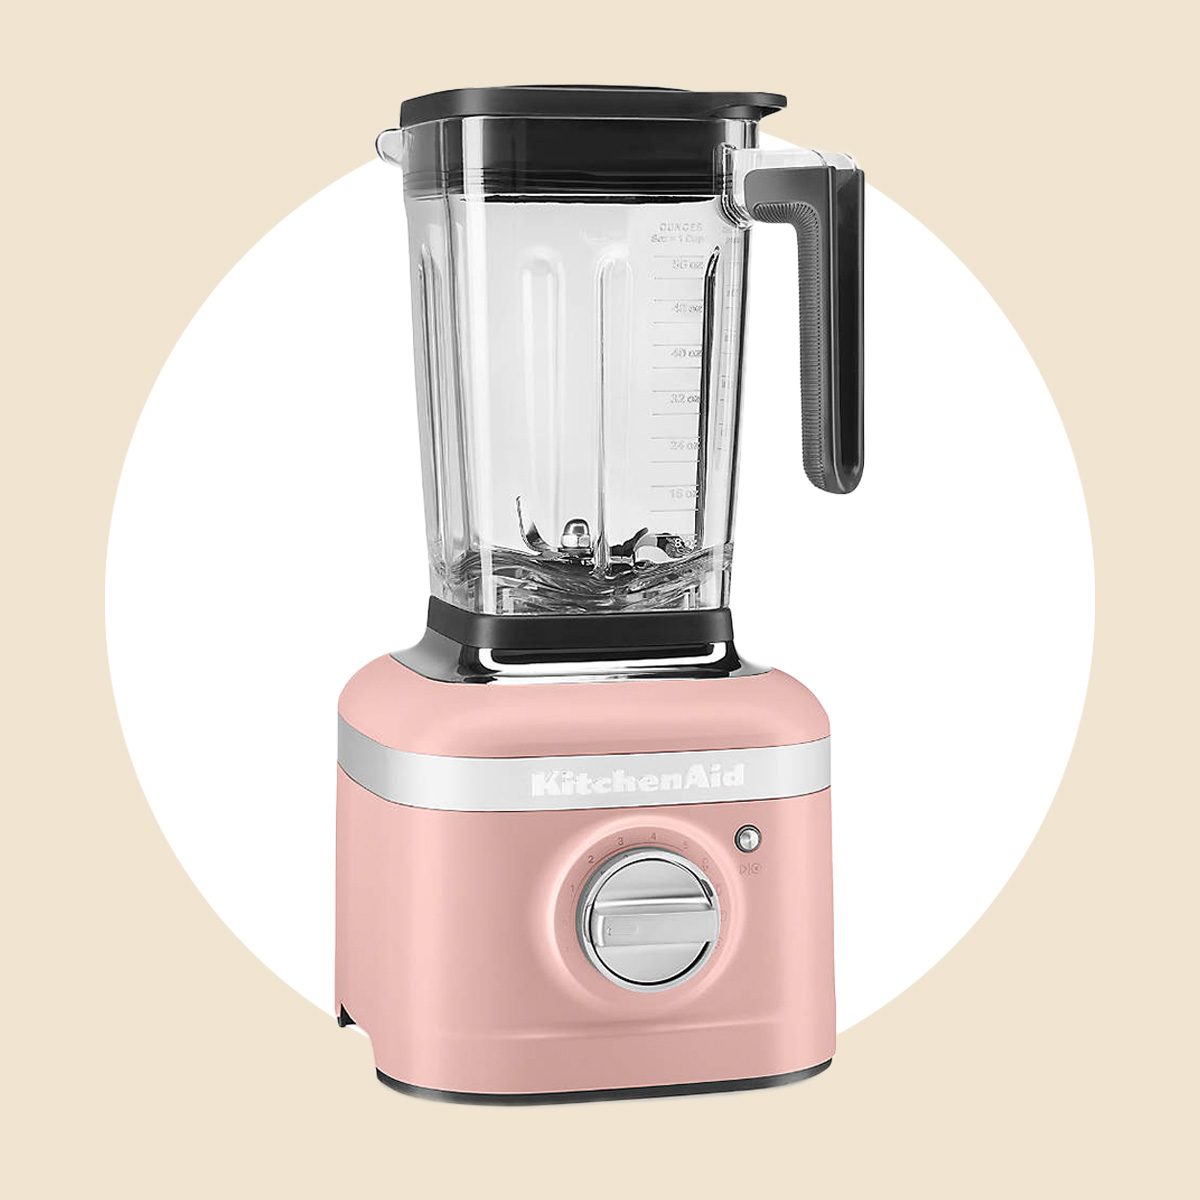 The Best Blender Options as Chosen by Test Kitchen Experts